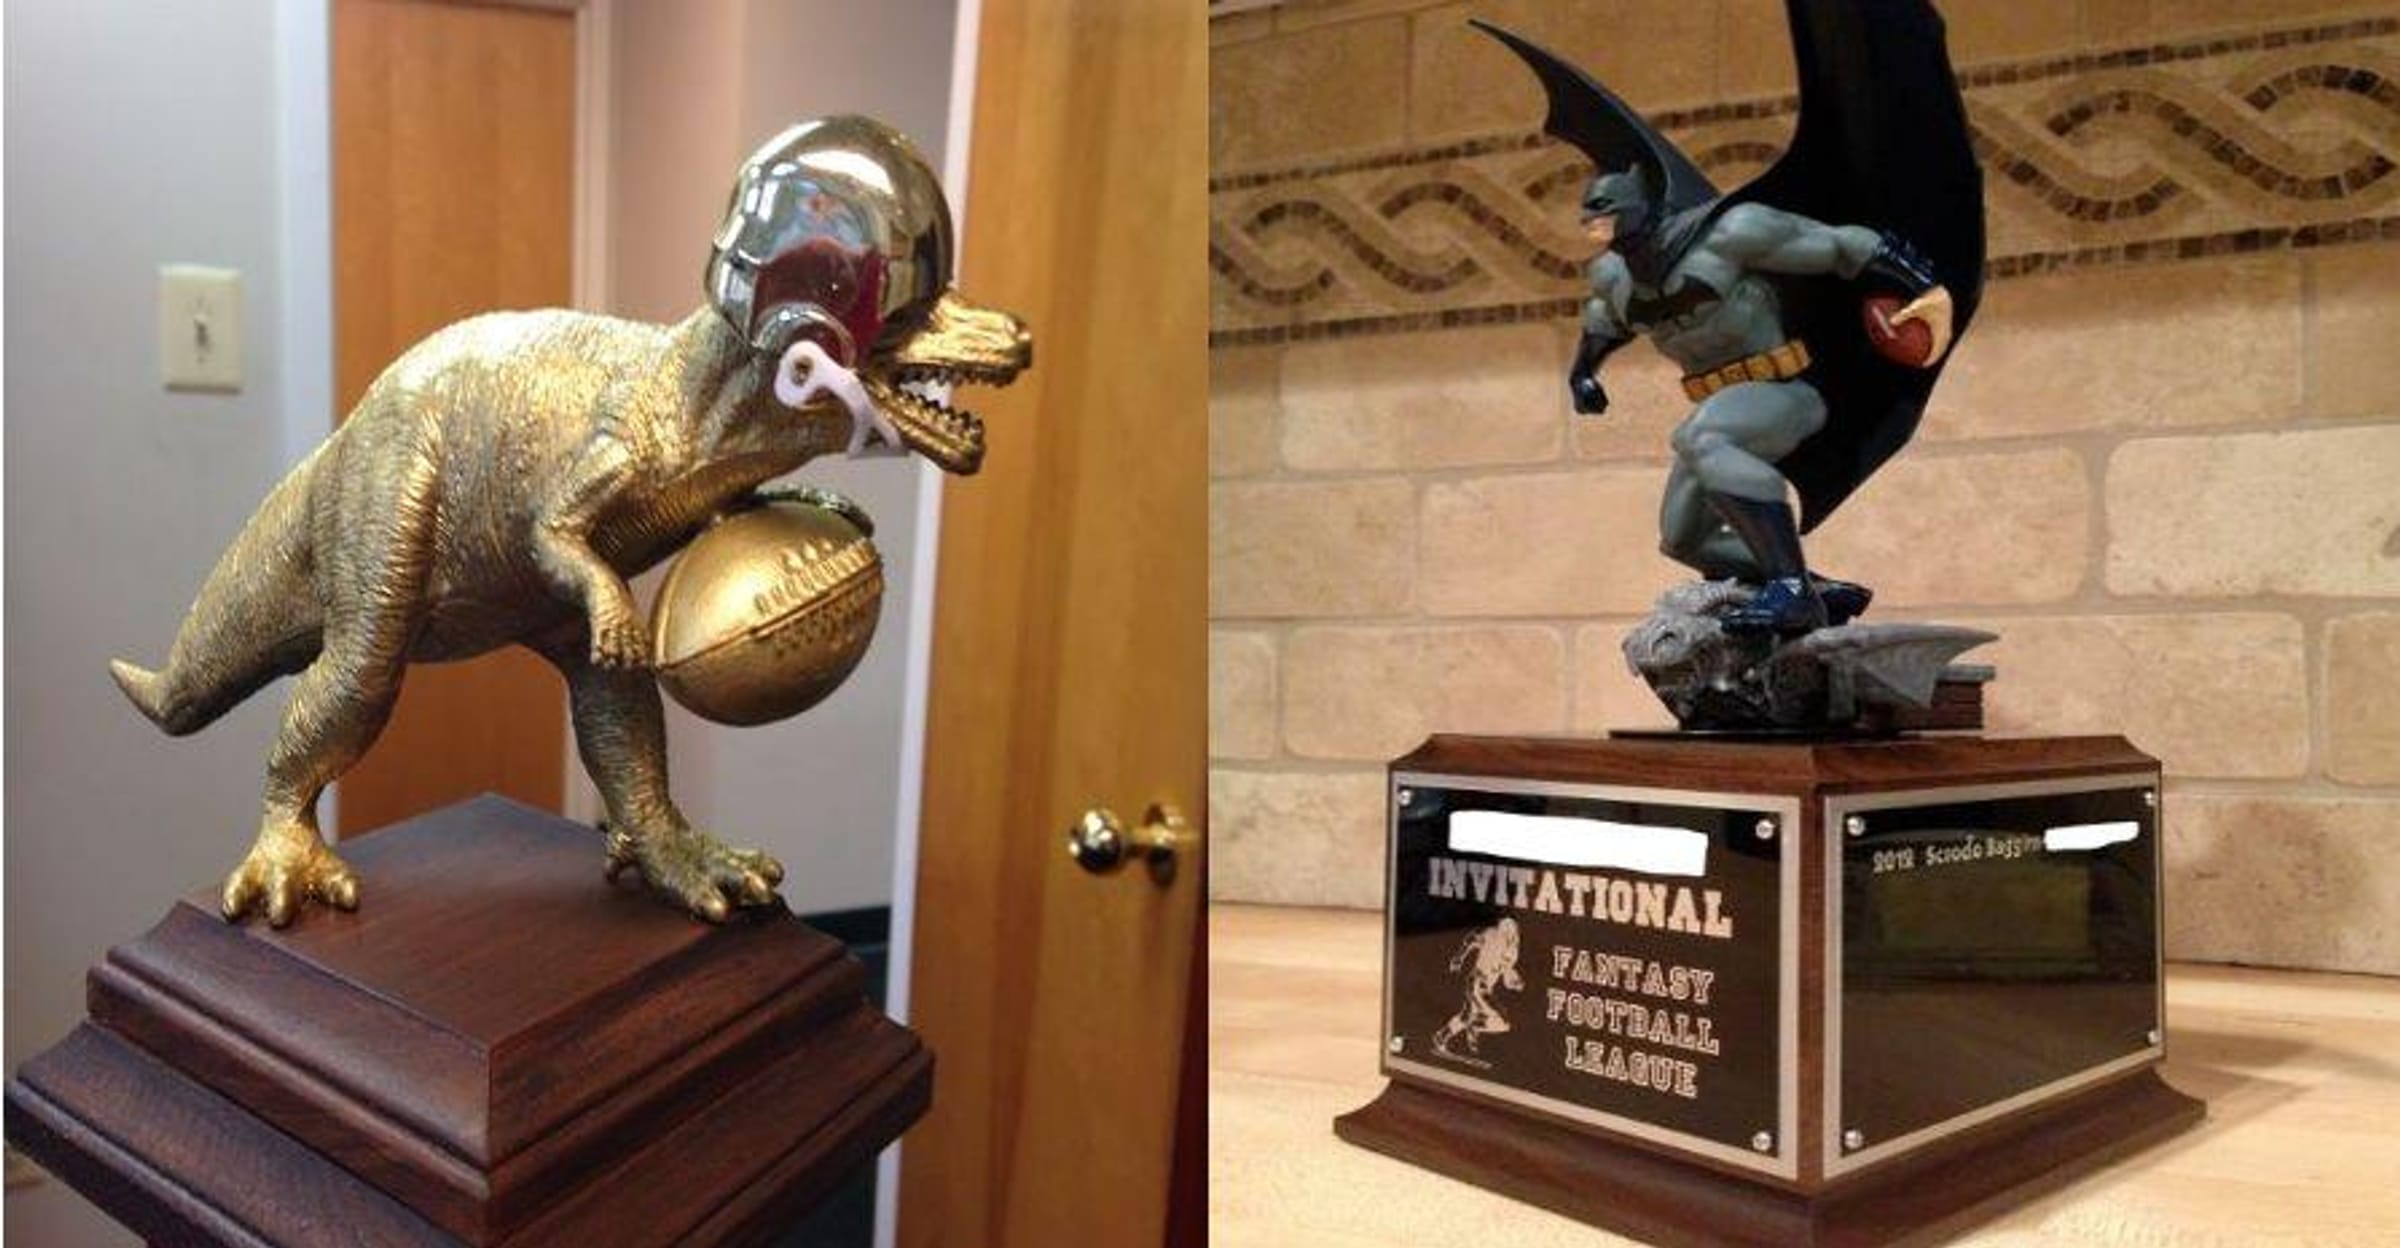 The Funniest Fantasy Football Trophies Ever Made